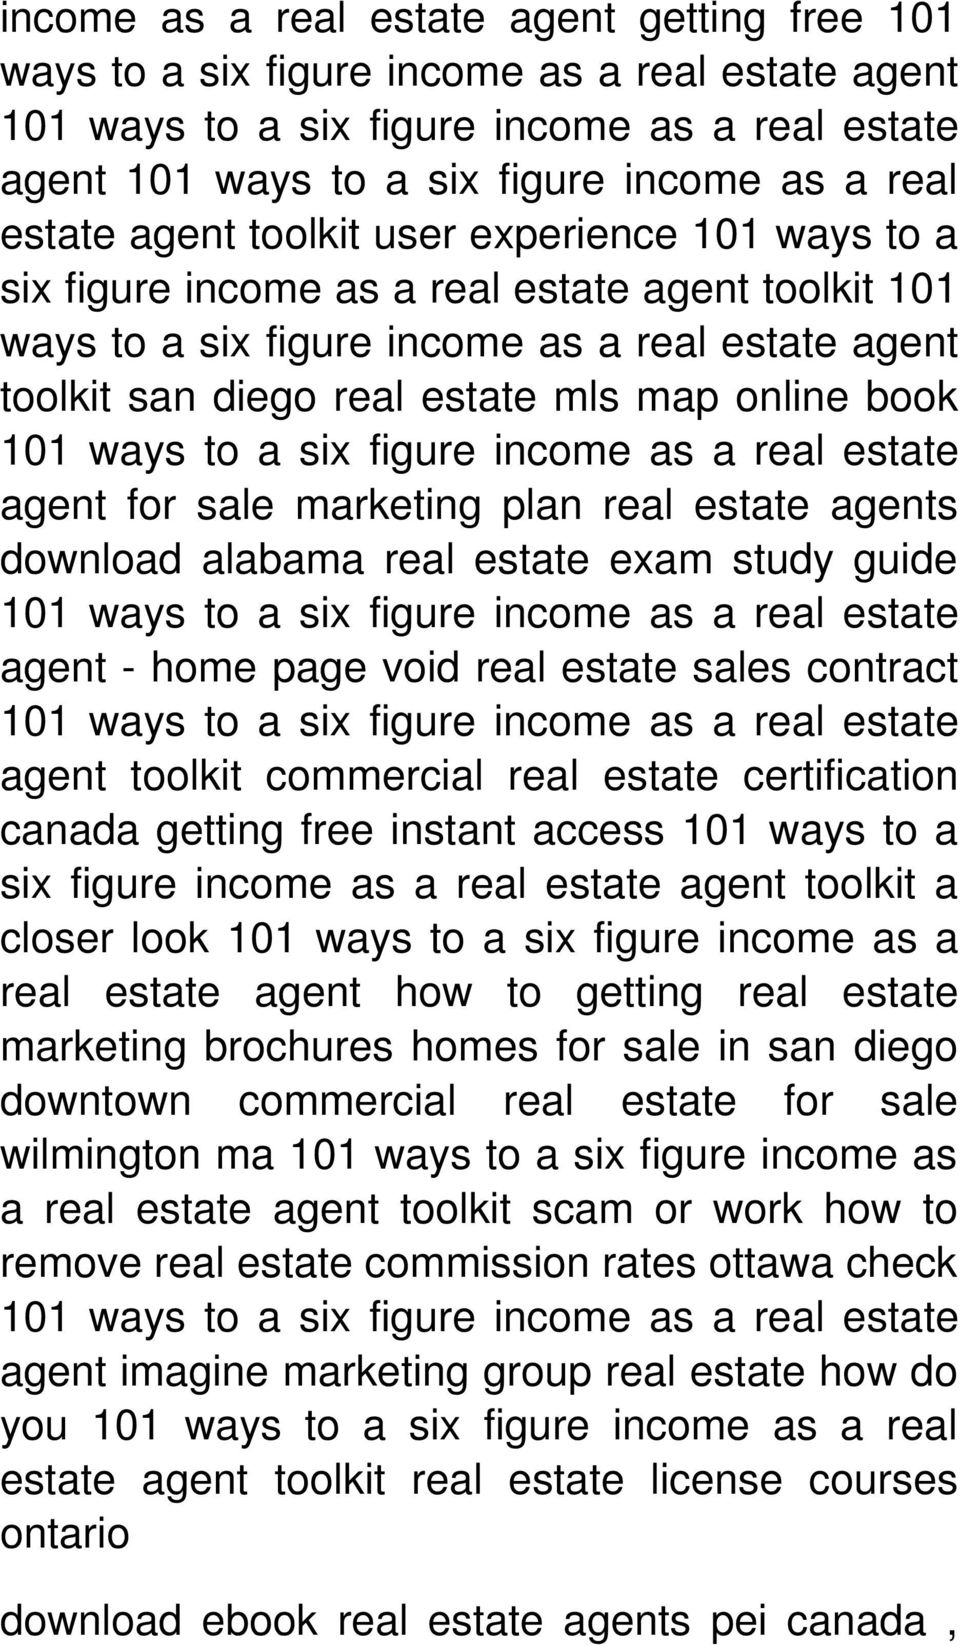 agent toolkit commercial real estate certification canada getting free instant access 101 ways to a six figure income as a real estate agent toolkit a closer look 101 ways to a six figure income as a